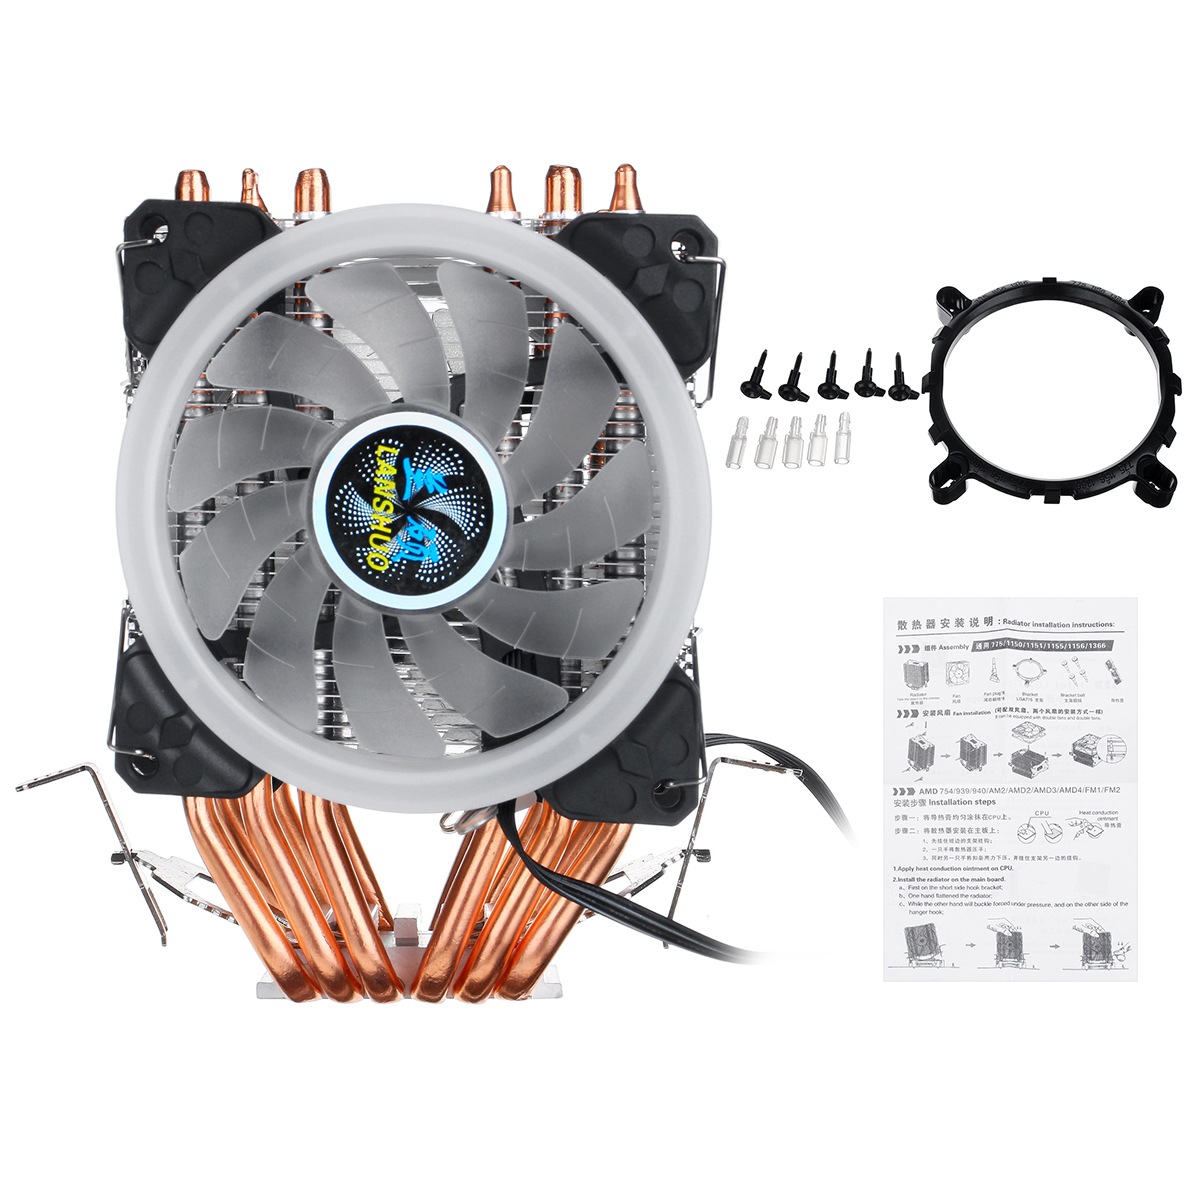 CPU-Cooler-LED-RGB-6-Heatpipes-4-Pin-Dual-Fan-For-Intel-115611551151775-AMD-1761052-12